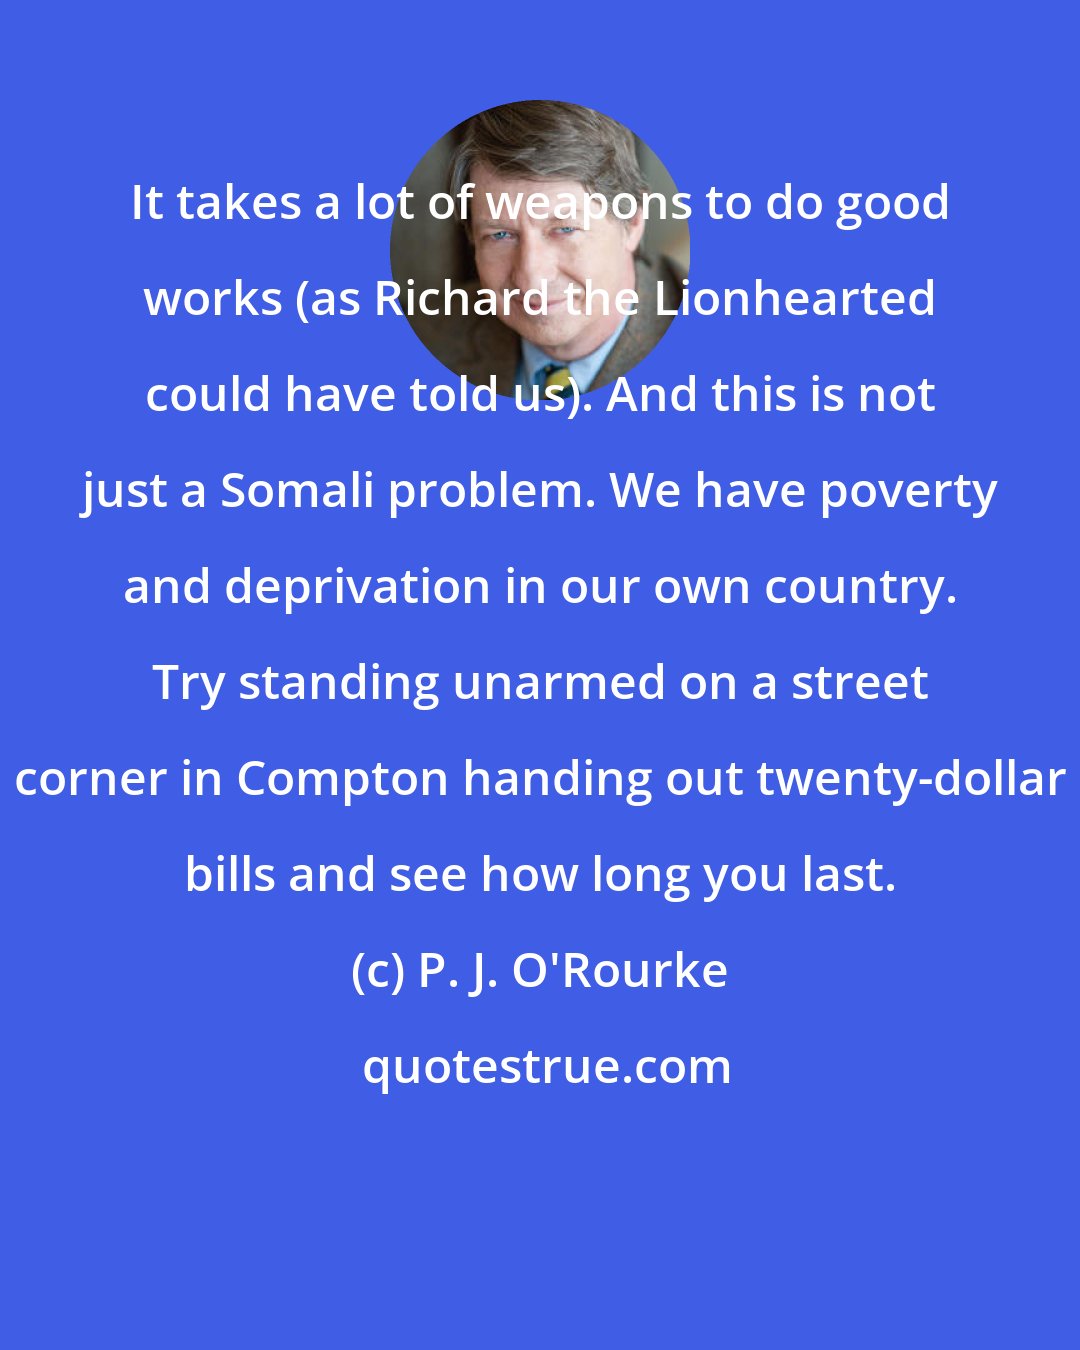 P. J. O'Rourke: It takes a lot of weapons to do good works (as Richard the Lionhearted could have told us). And this is not just a Somali problem. We have poverty and deprivation in our own country. Try standing unarmed on a street corner in Compton handing out twenty-dollar bills and see how long you last.